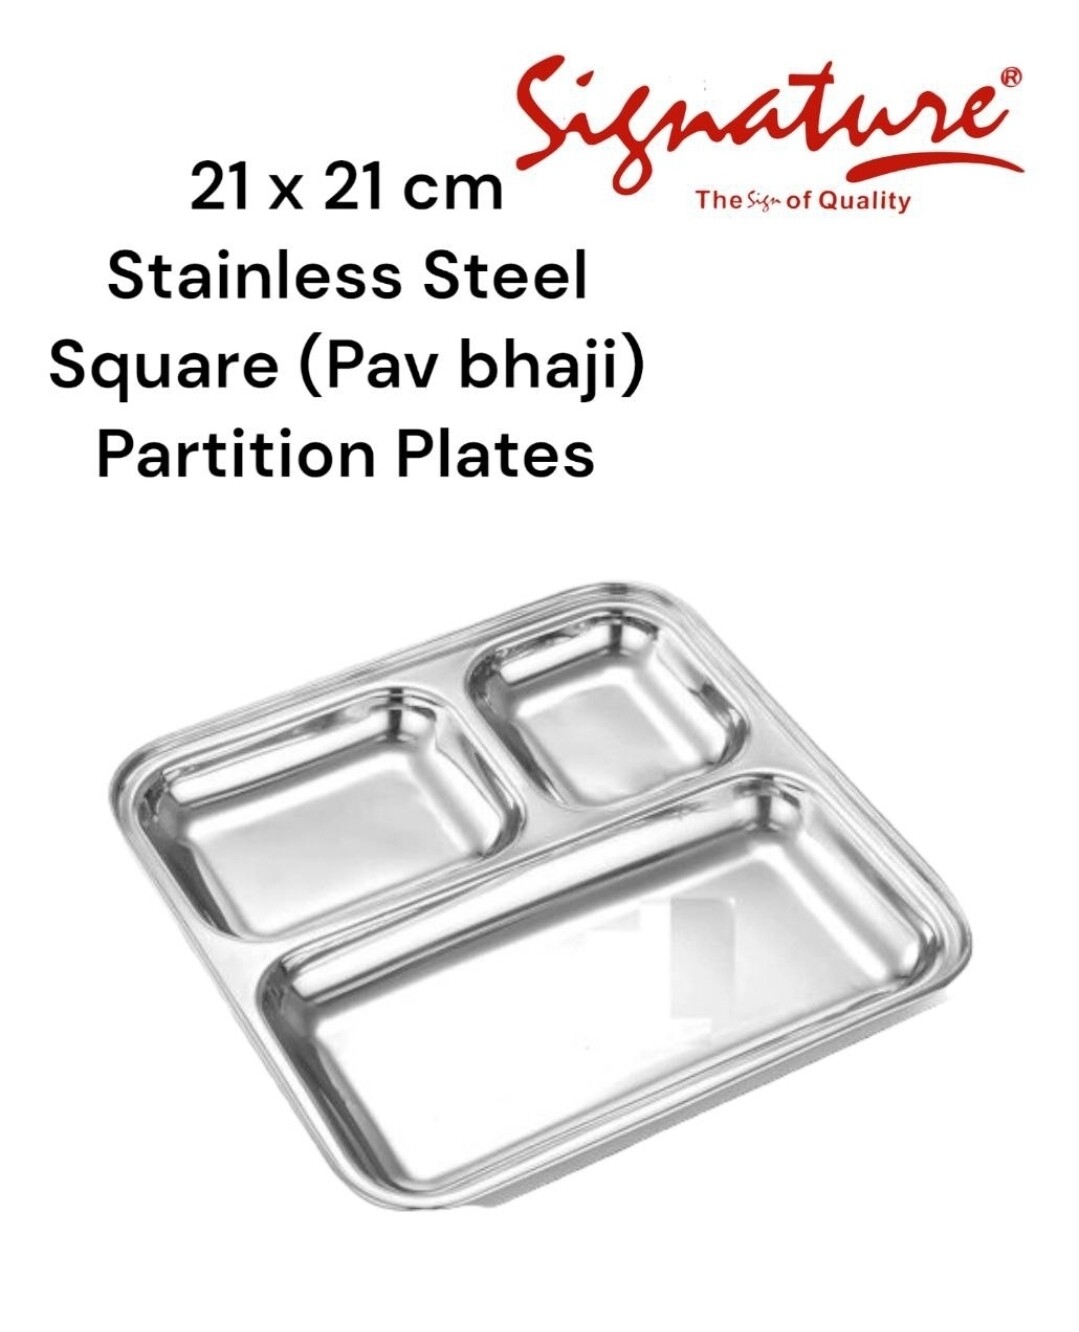 Signature stainless steel partition plate 21x21cm